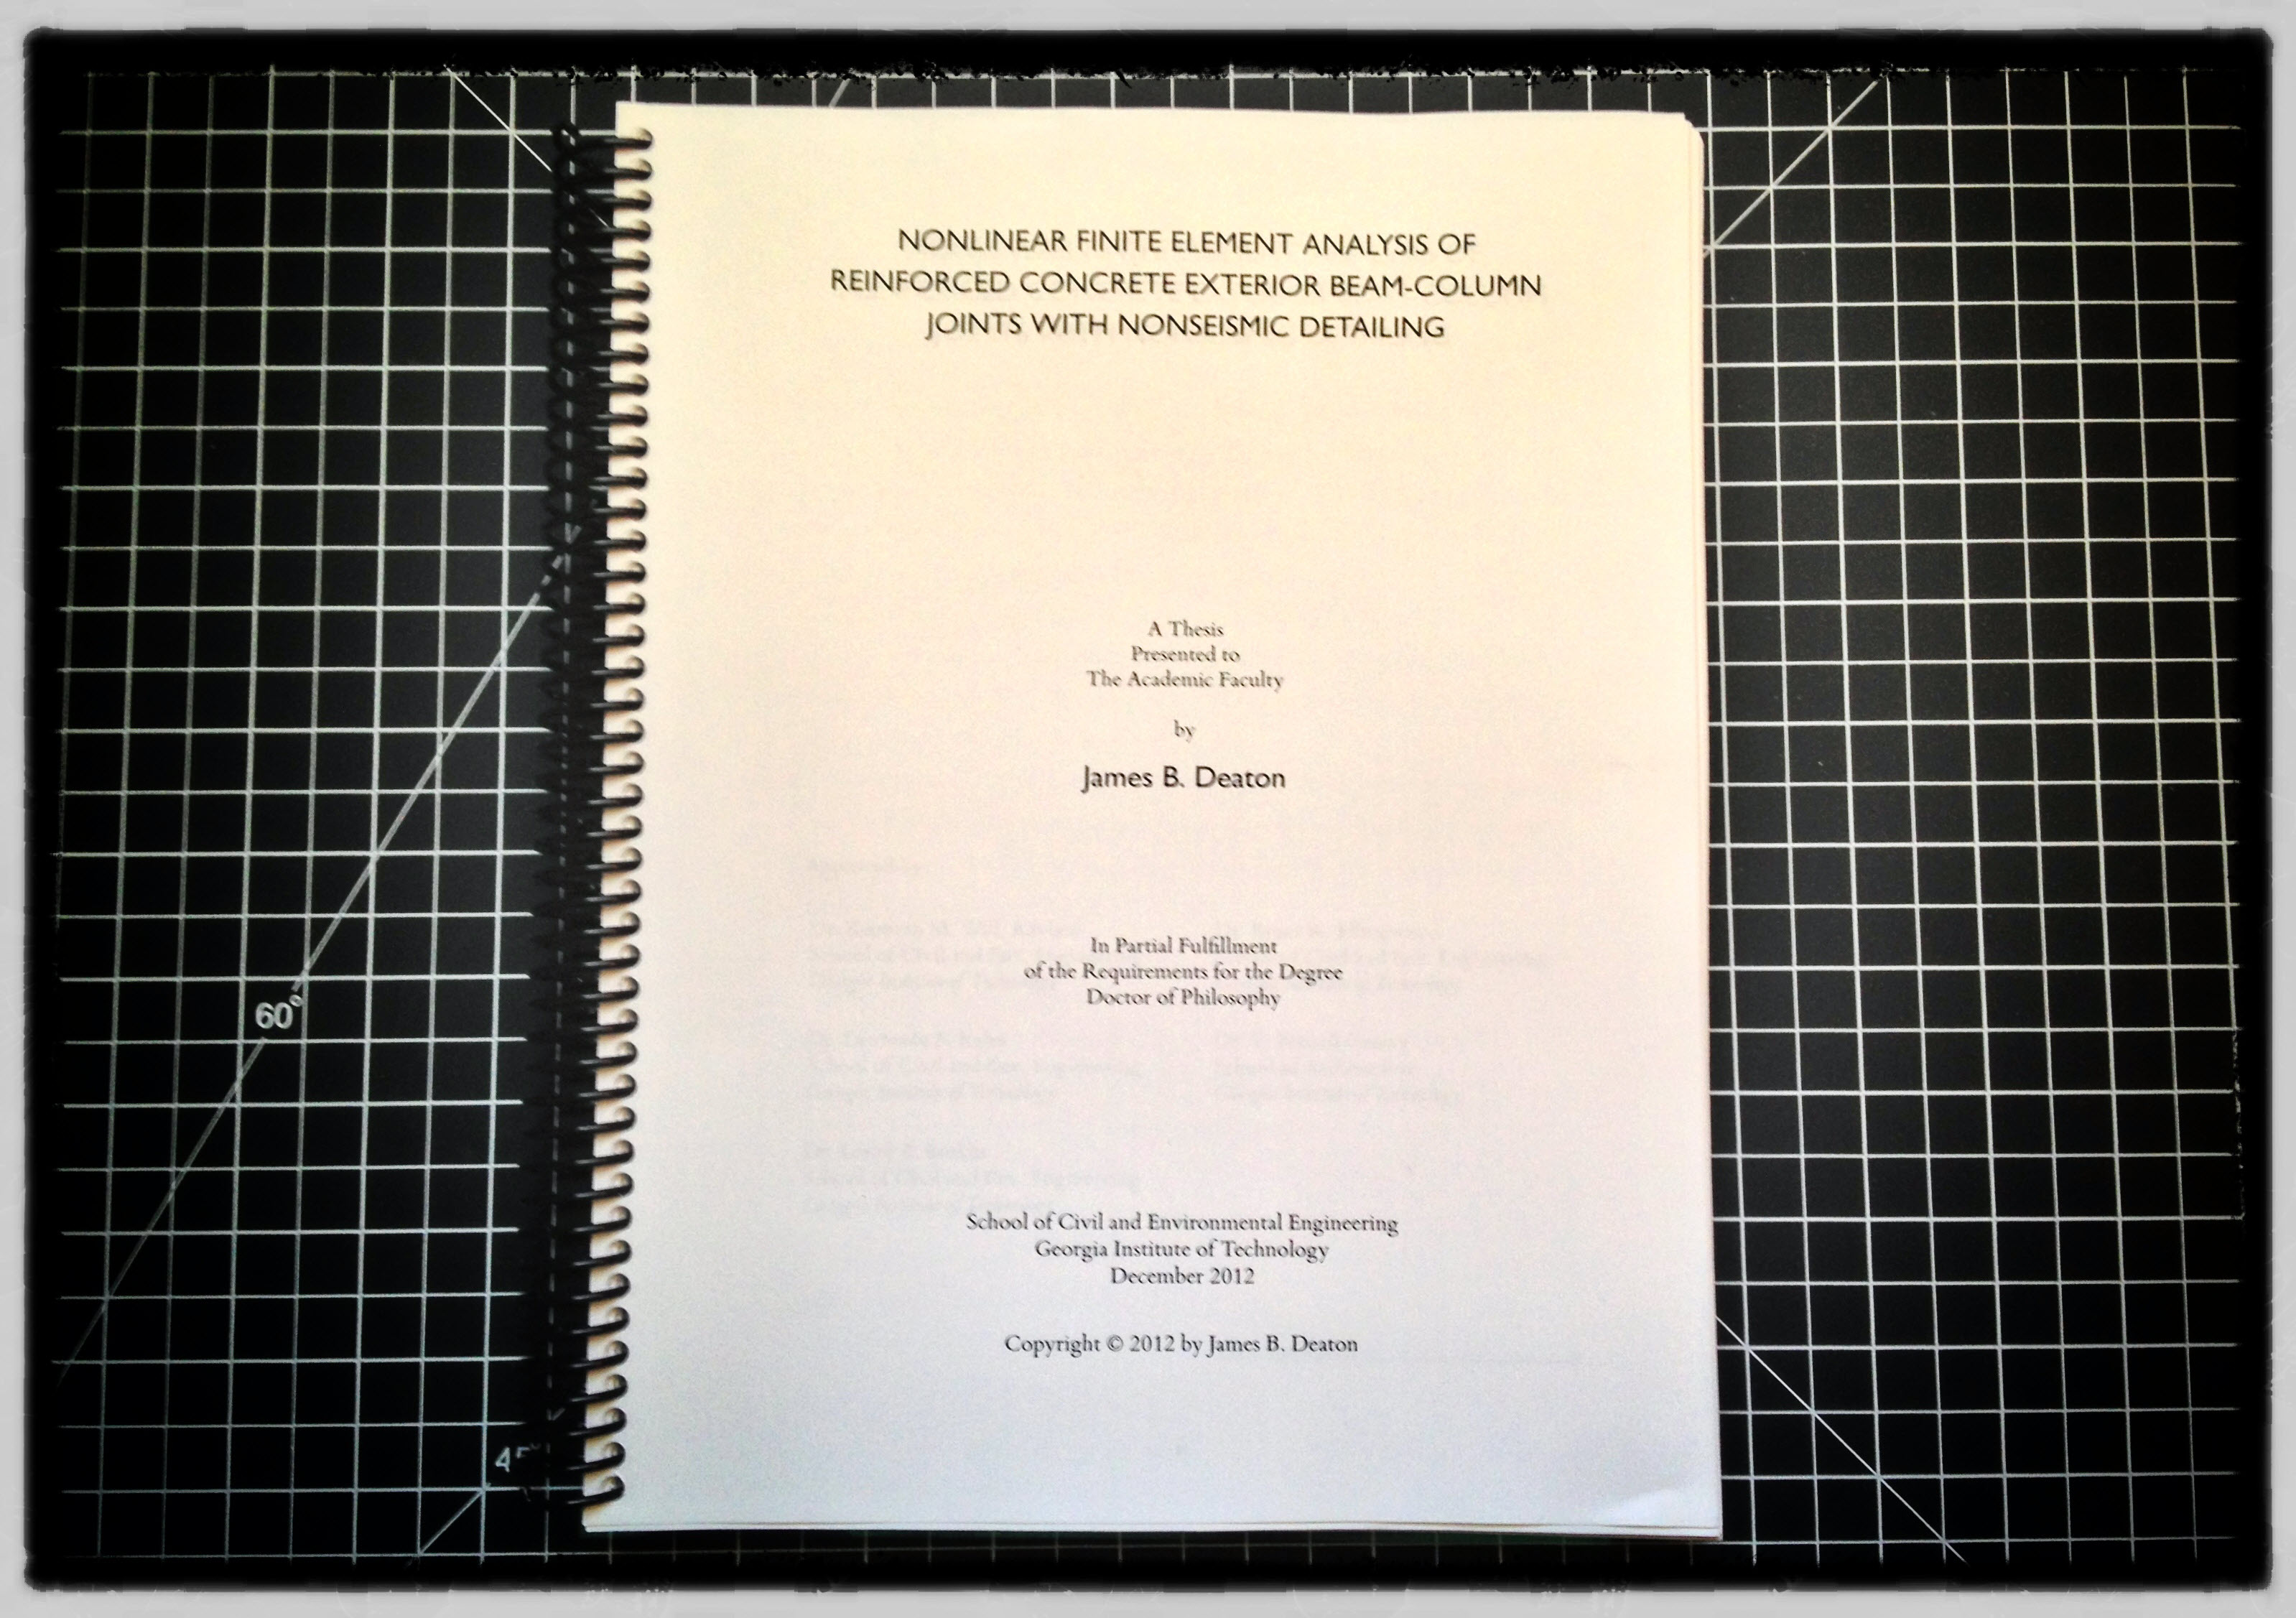 Thesis to committee